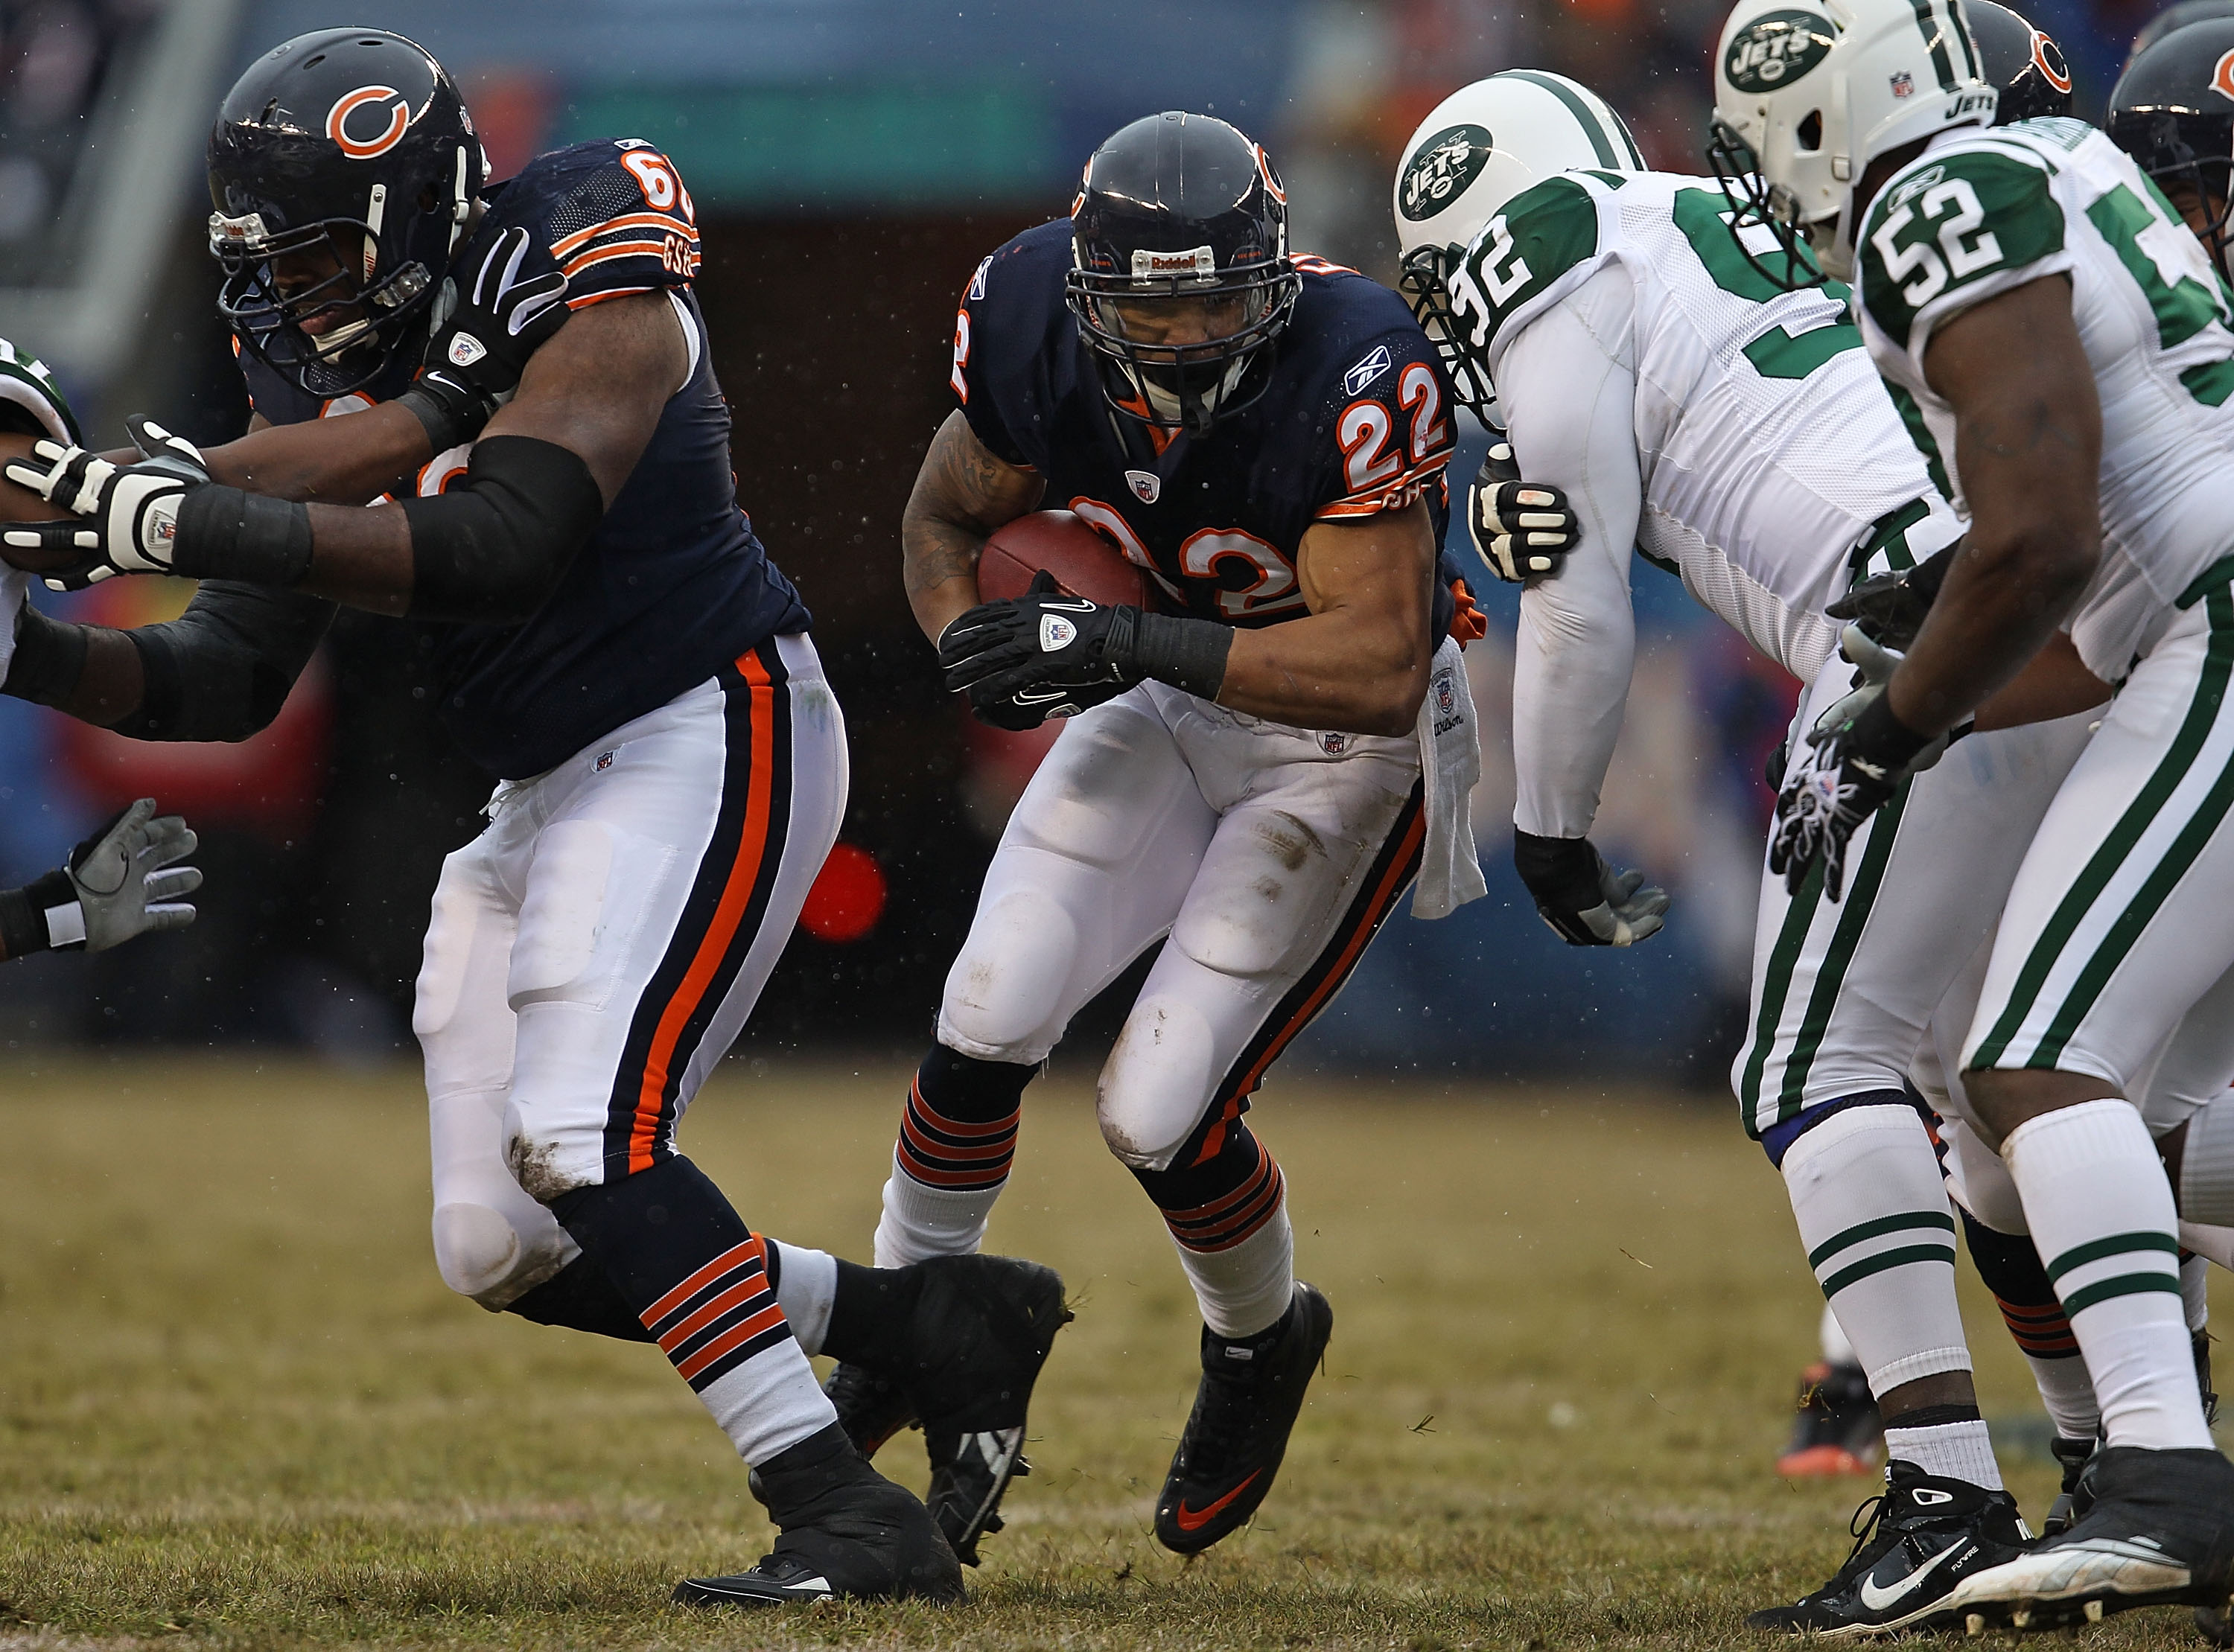 CHICAGO, IL - DECEMBER 26: Matt Forte #22 of the Chicago Bears follows blocker Frank Omiyale #68 as he runs against Shaun Ellis #92 and David Harris #52 of the New York Jets at Soldier Field on December 26, 2010 in Chicago, Illinois. The Bears defeated th